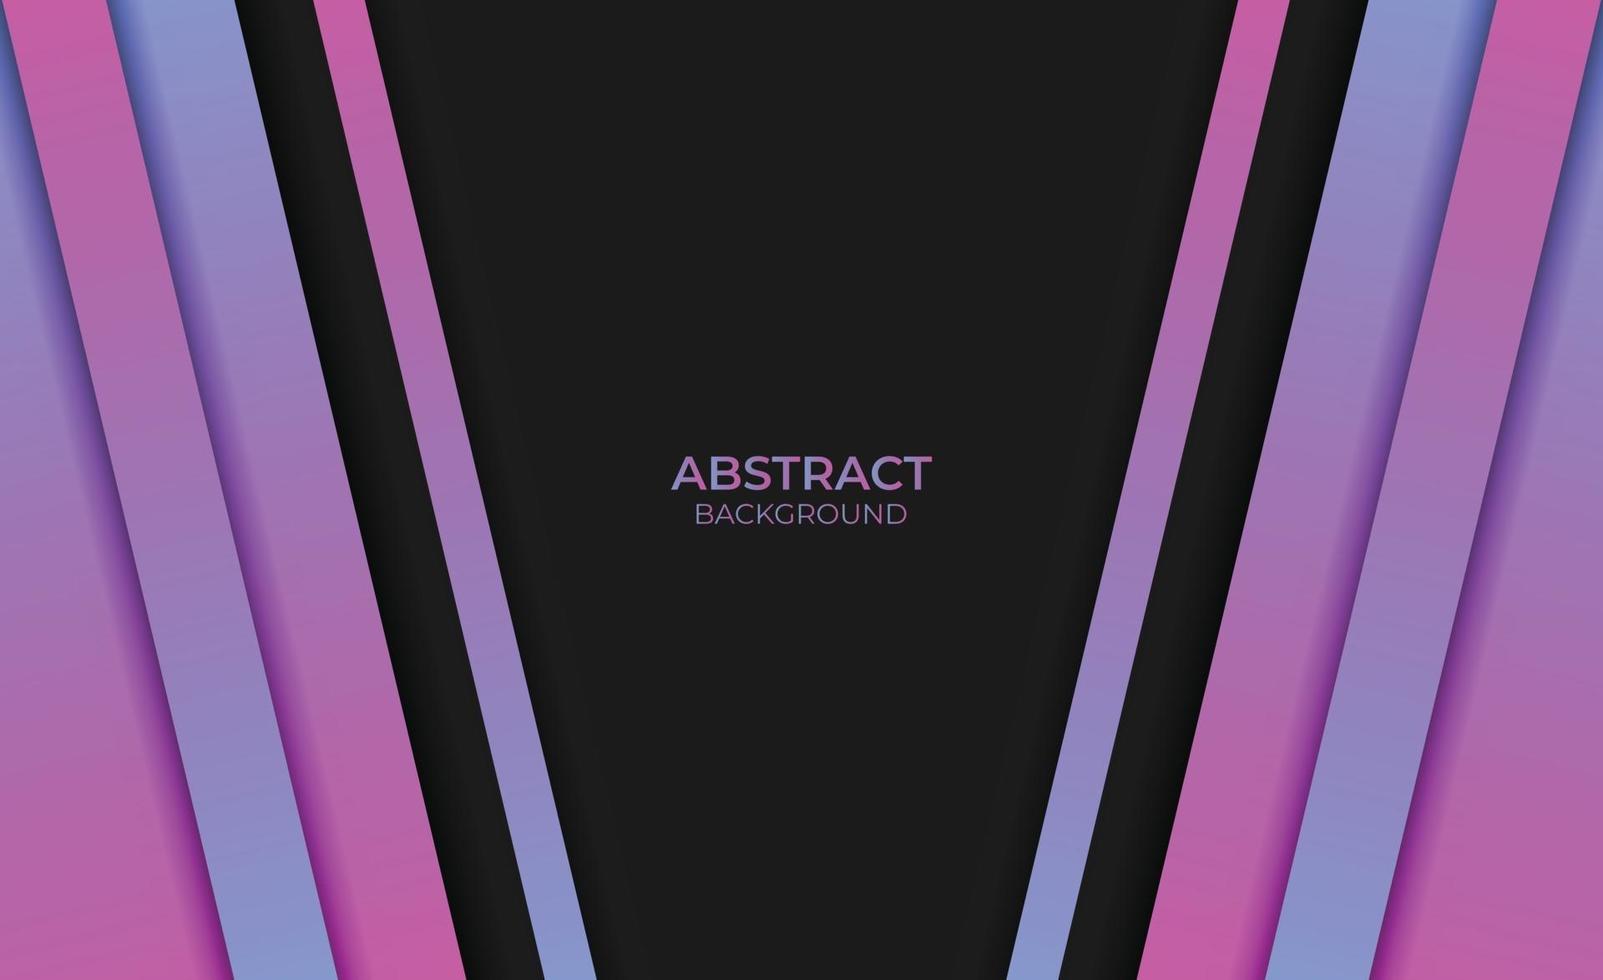 Design Abstract Style Background Gradient vector